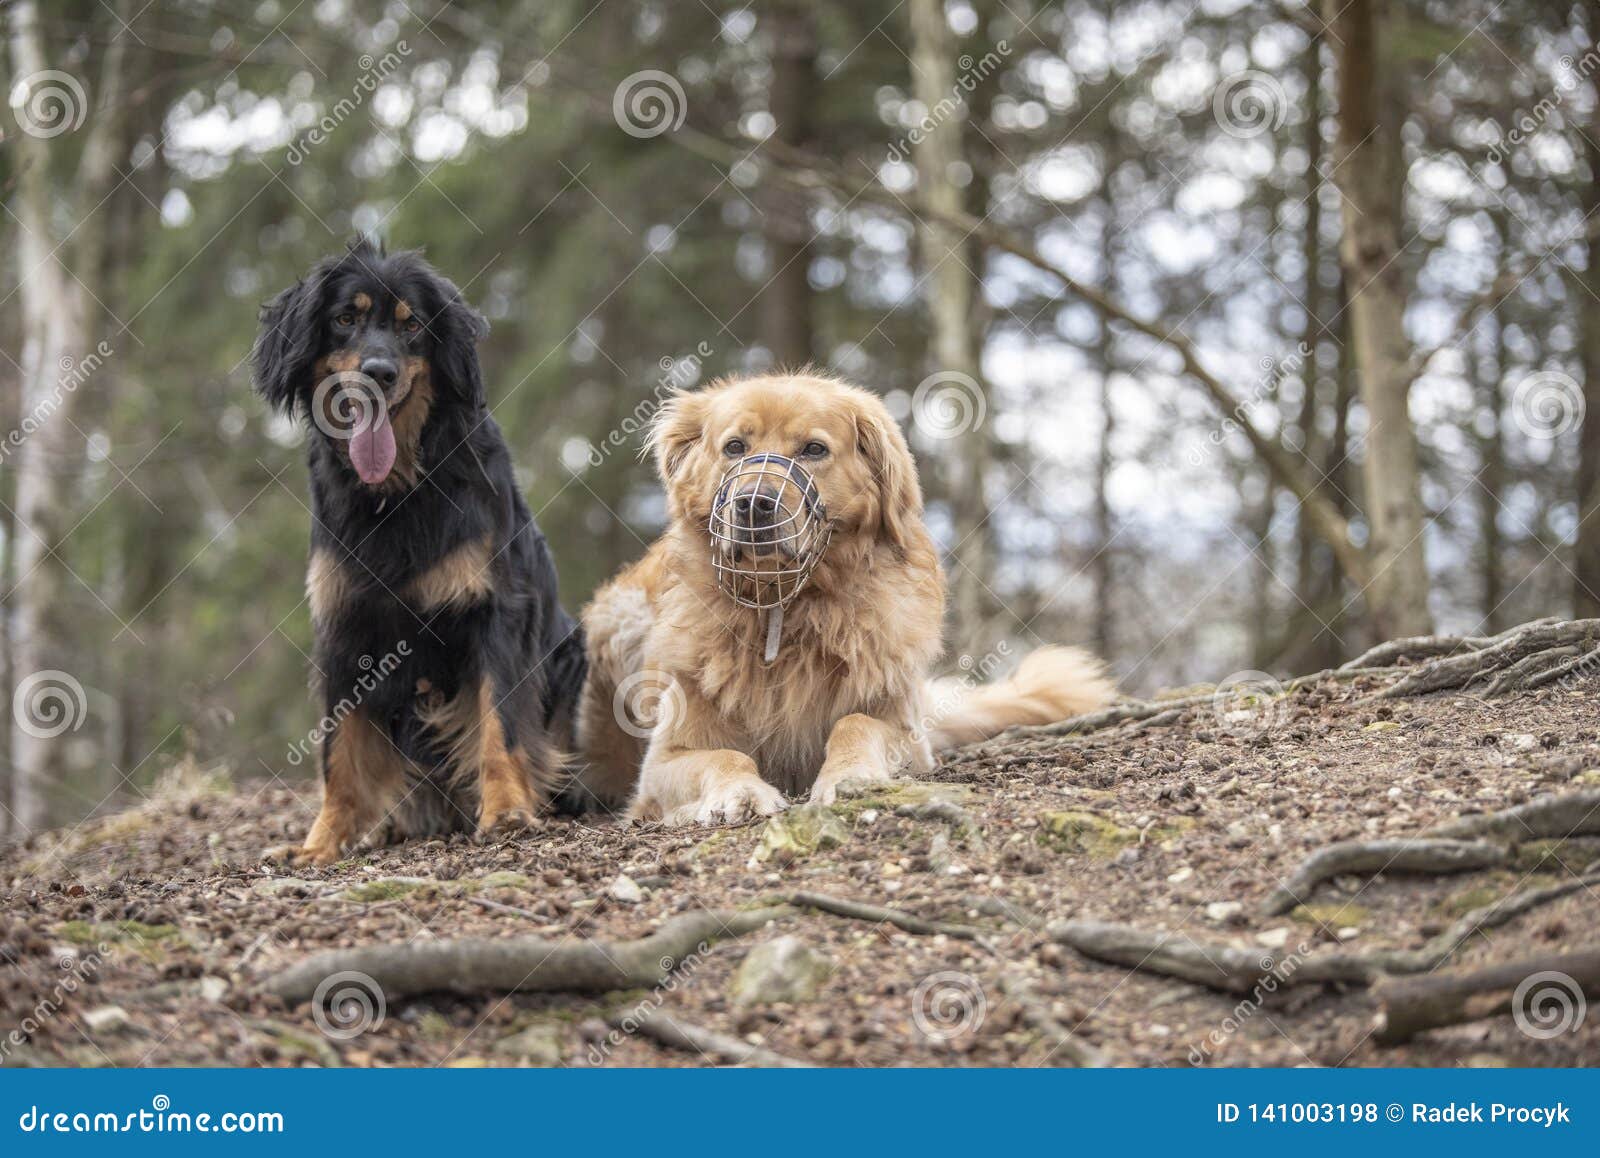 Dog Hovawart Guarding Breed From Germany Stock Photo Image Of Guarding Hovawart 141003198